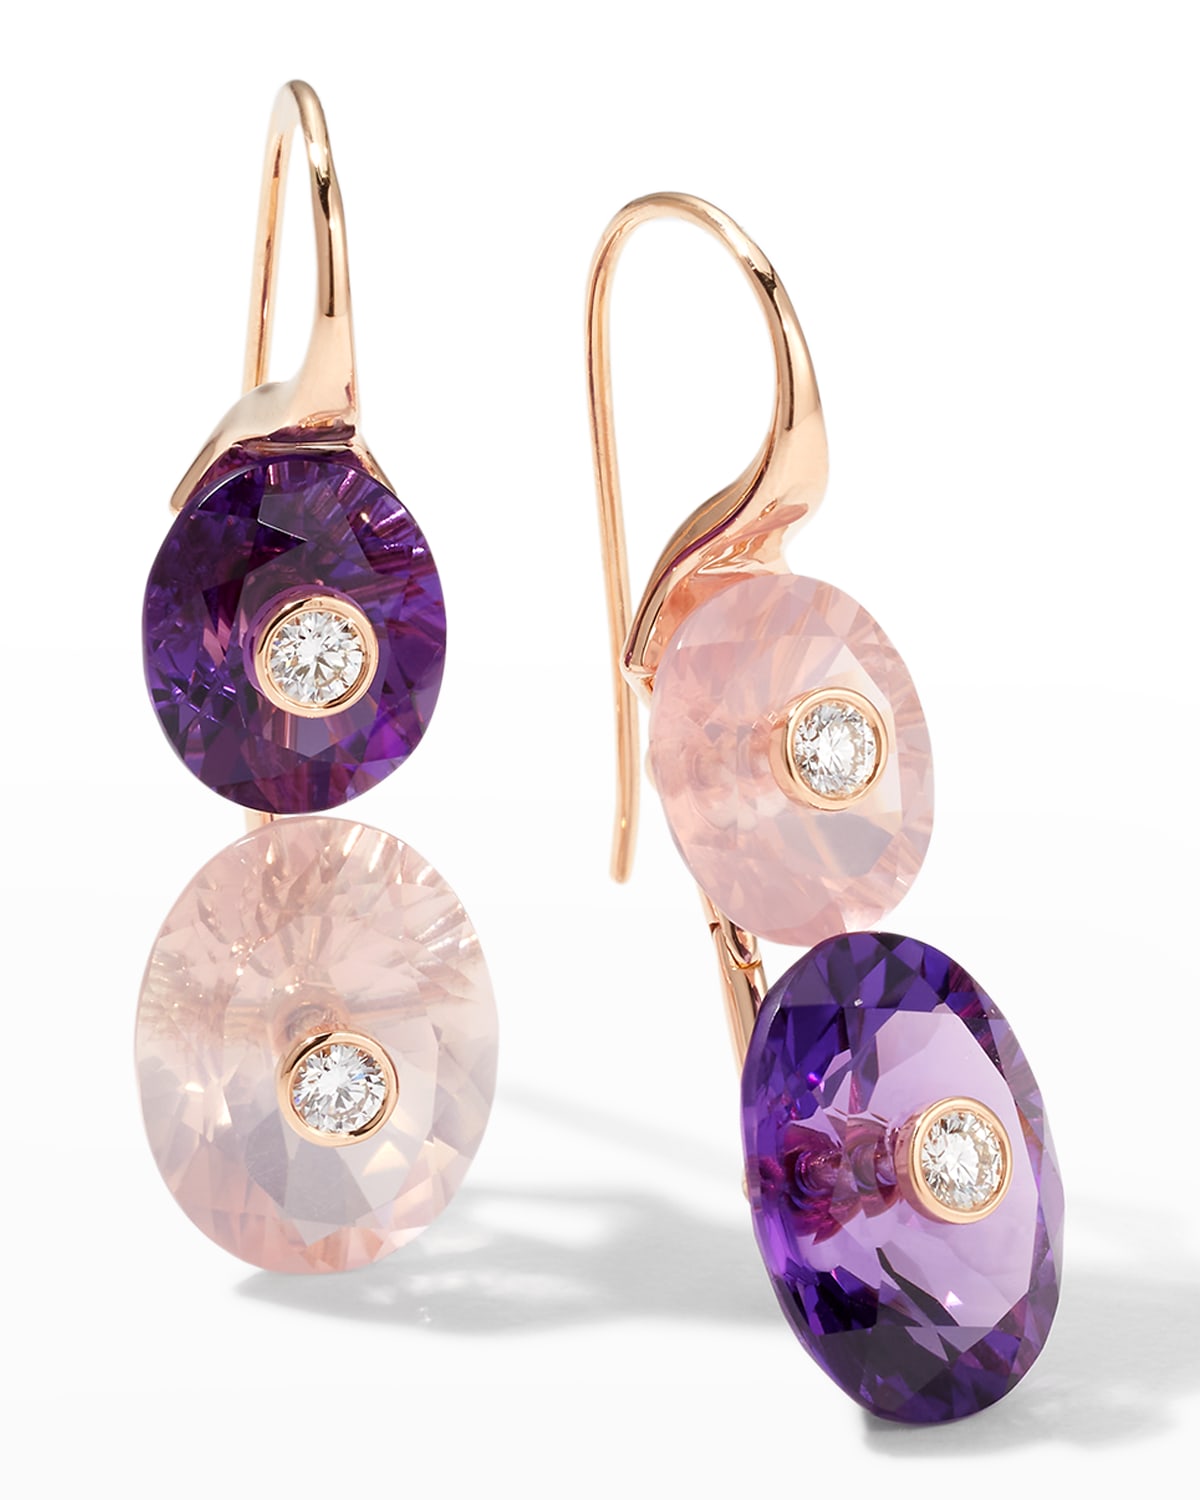 18K Rose Gold Fish Hook 2 Oval Amethyst and 2 Oval Rose Quartz Earrings with 4 Round Diamonds